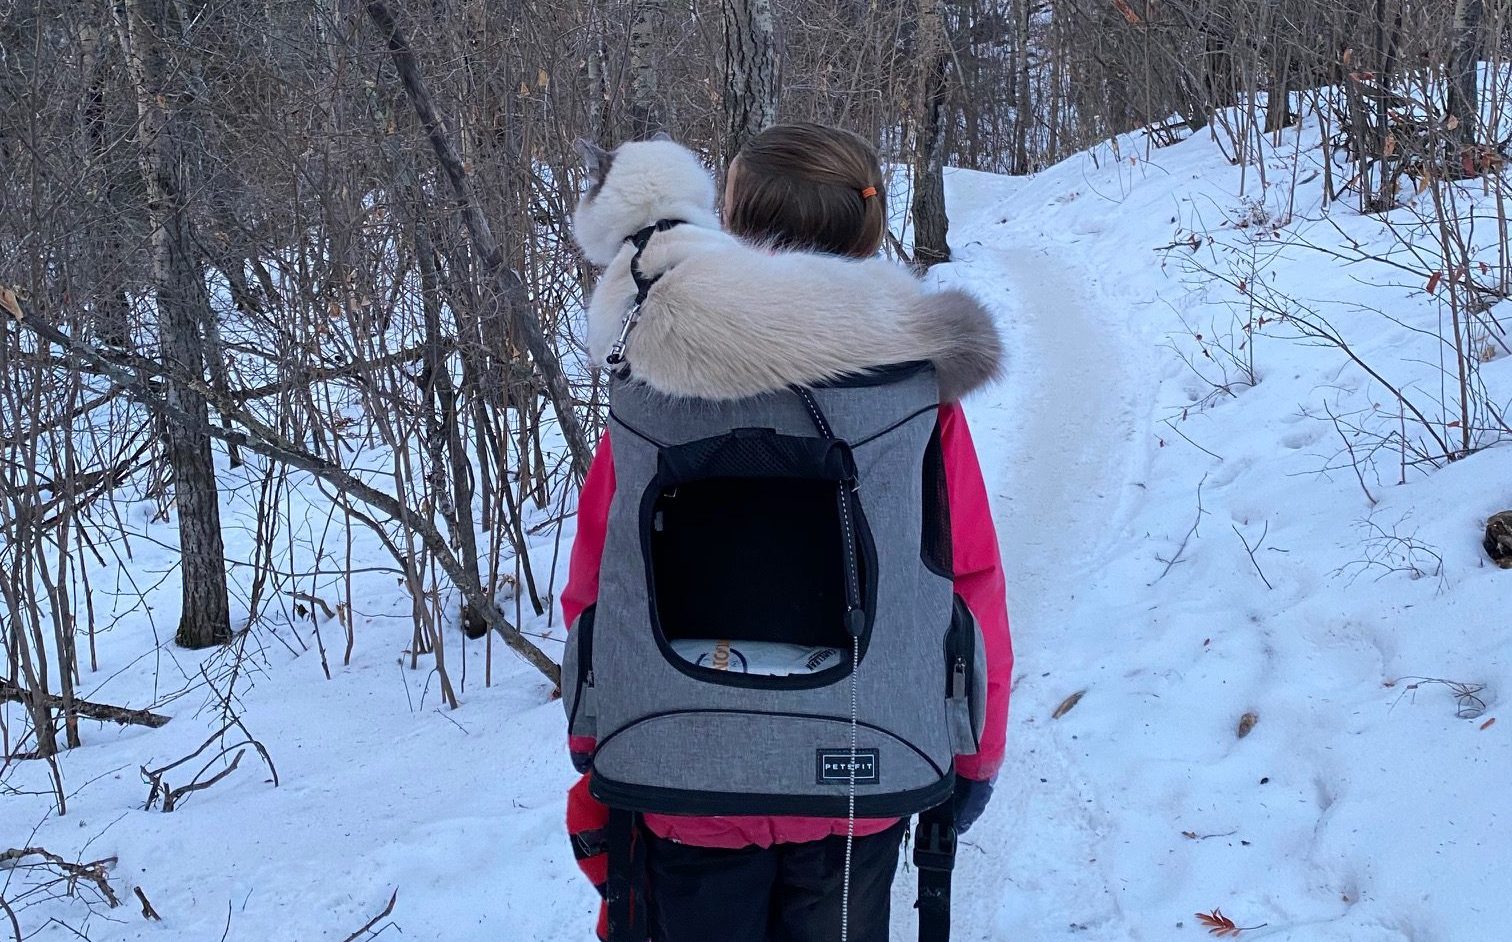 Featured Image for “Enjoying the Trails with Your Little Ones and Furry Friends in All Seasons”